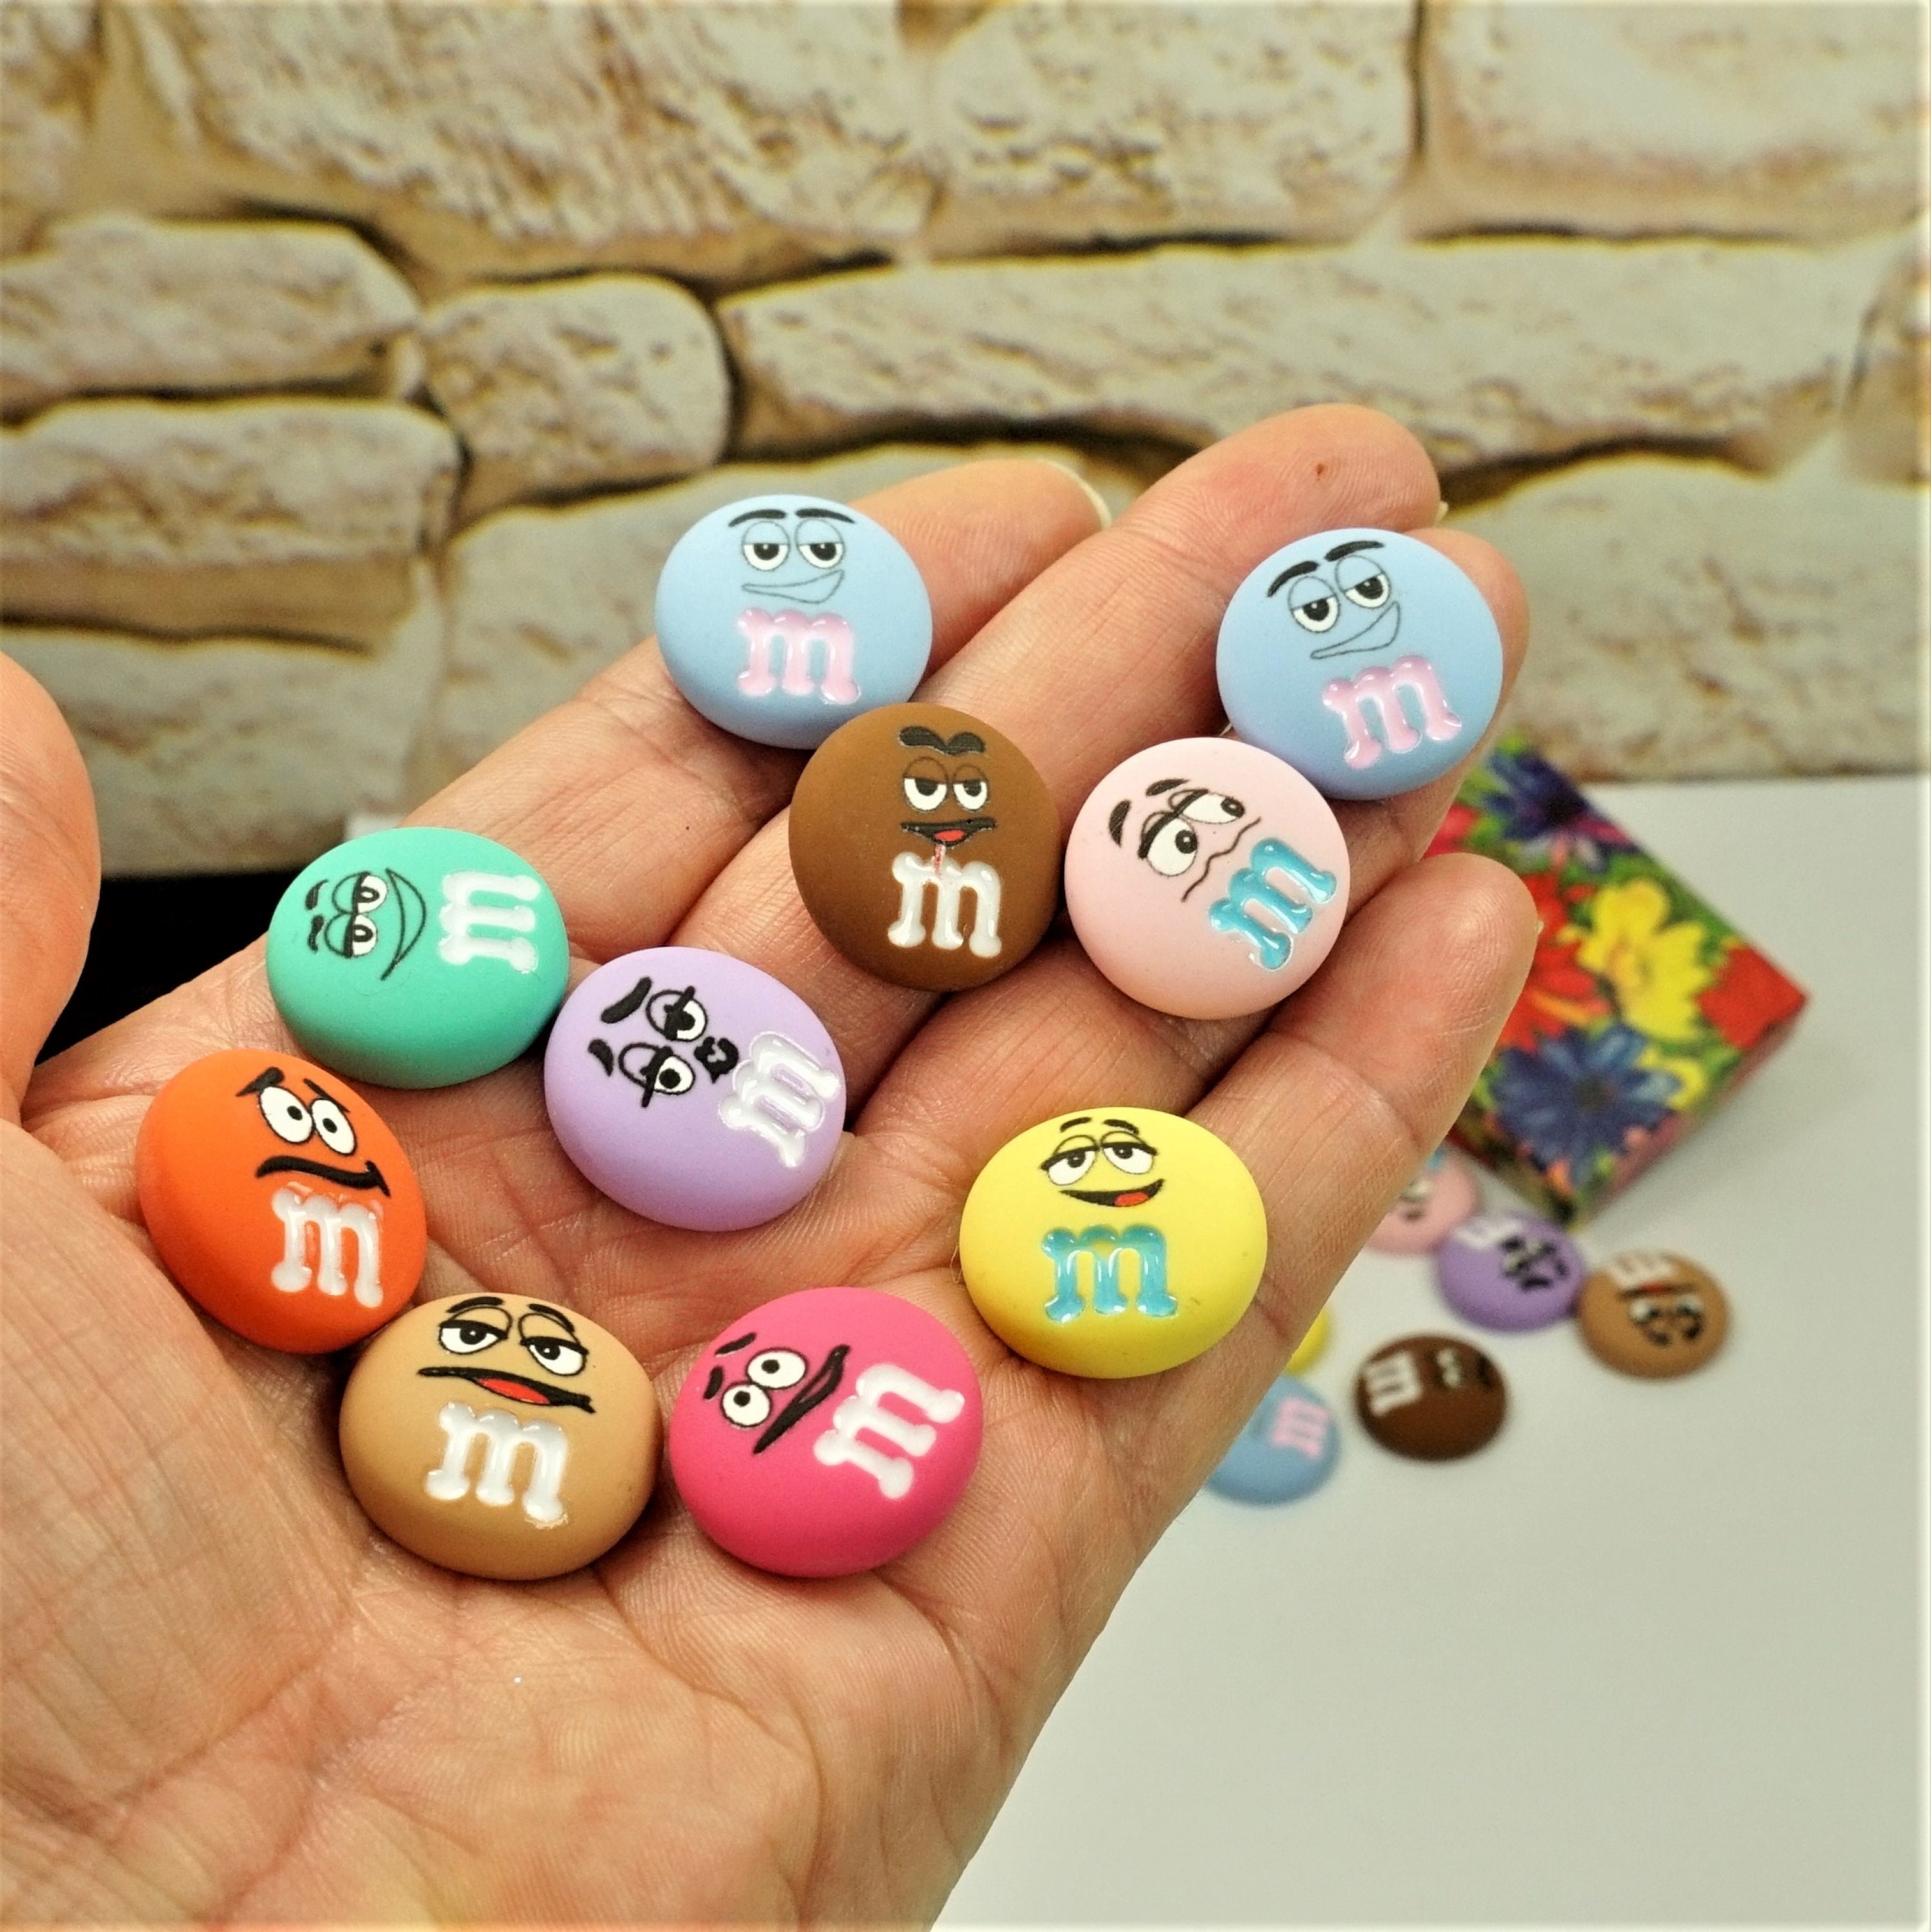 M&M Smiling Characters Cartoon Face Charms Fake Candy Food Decoden 10